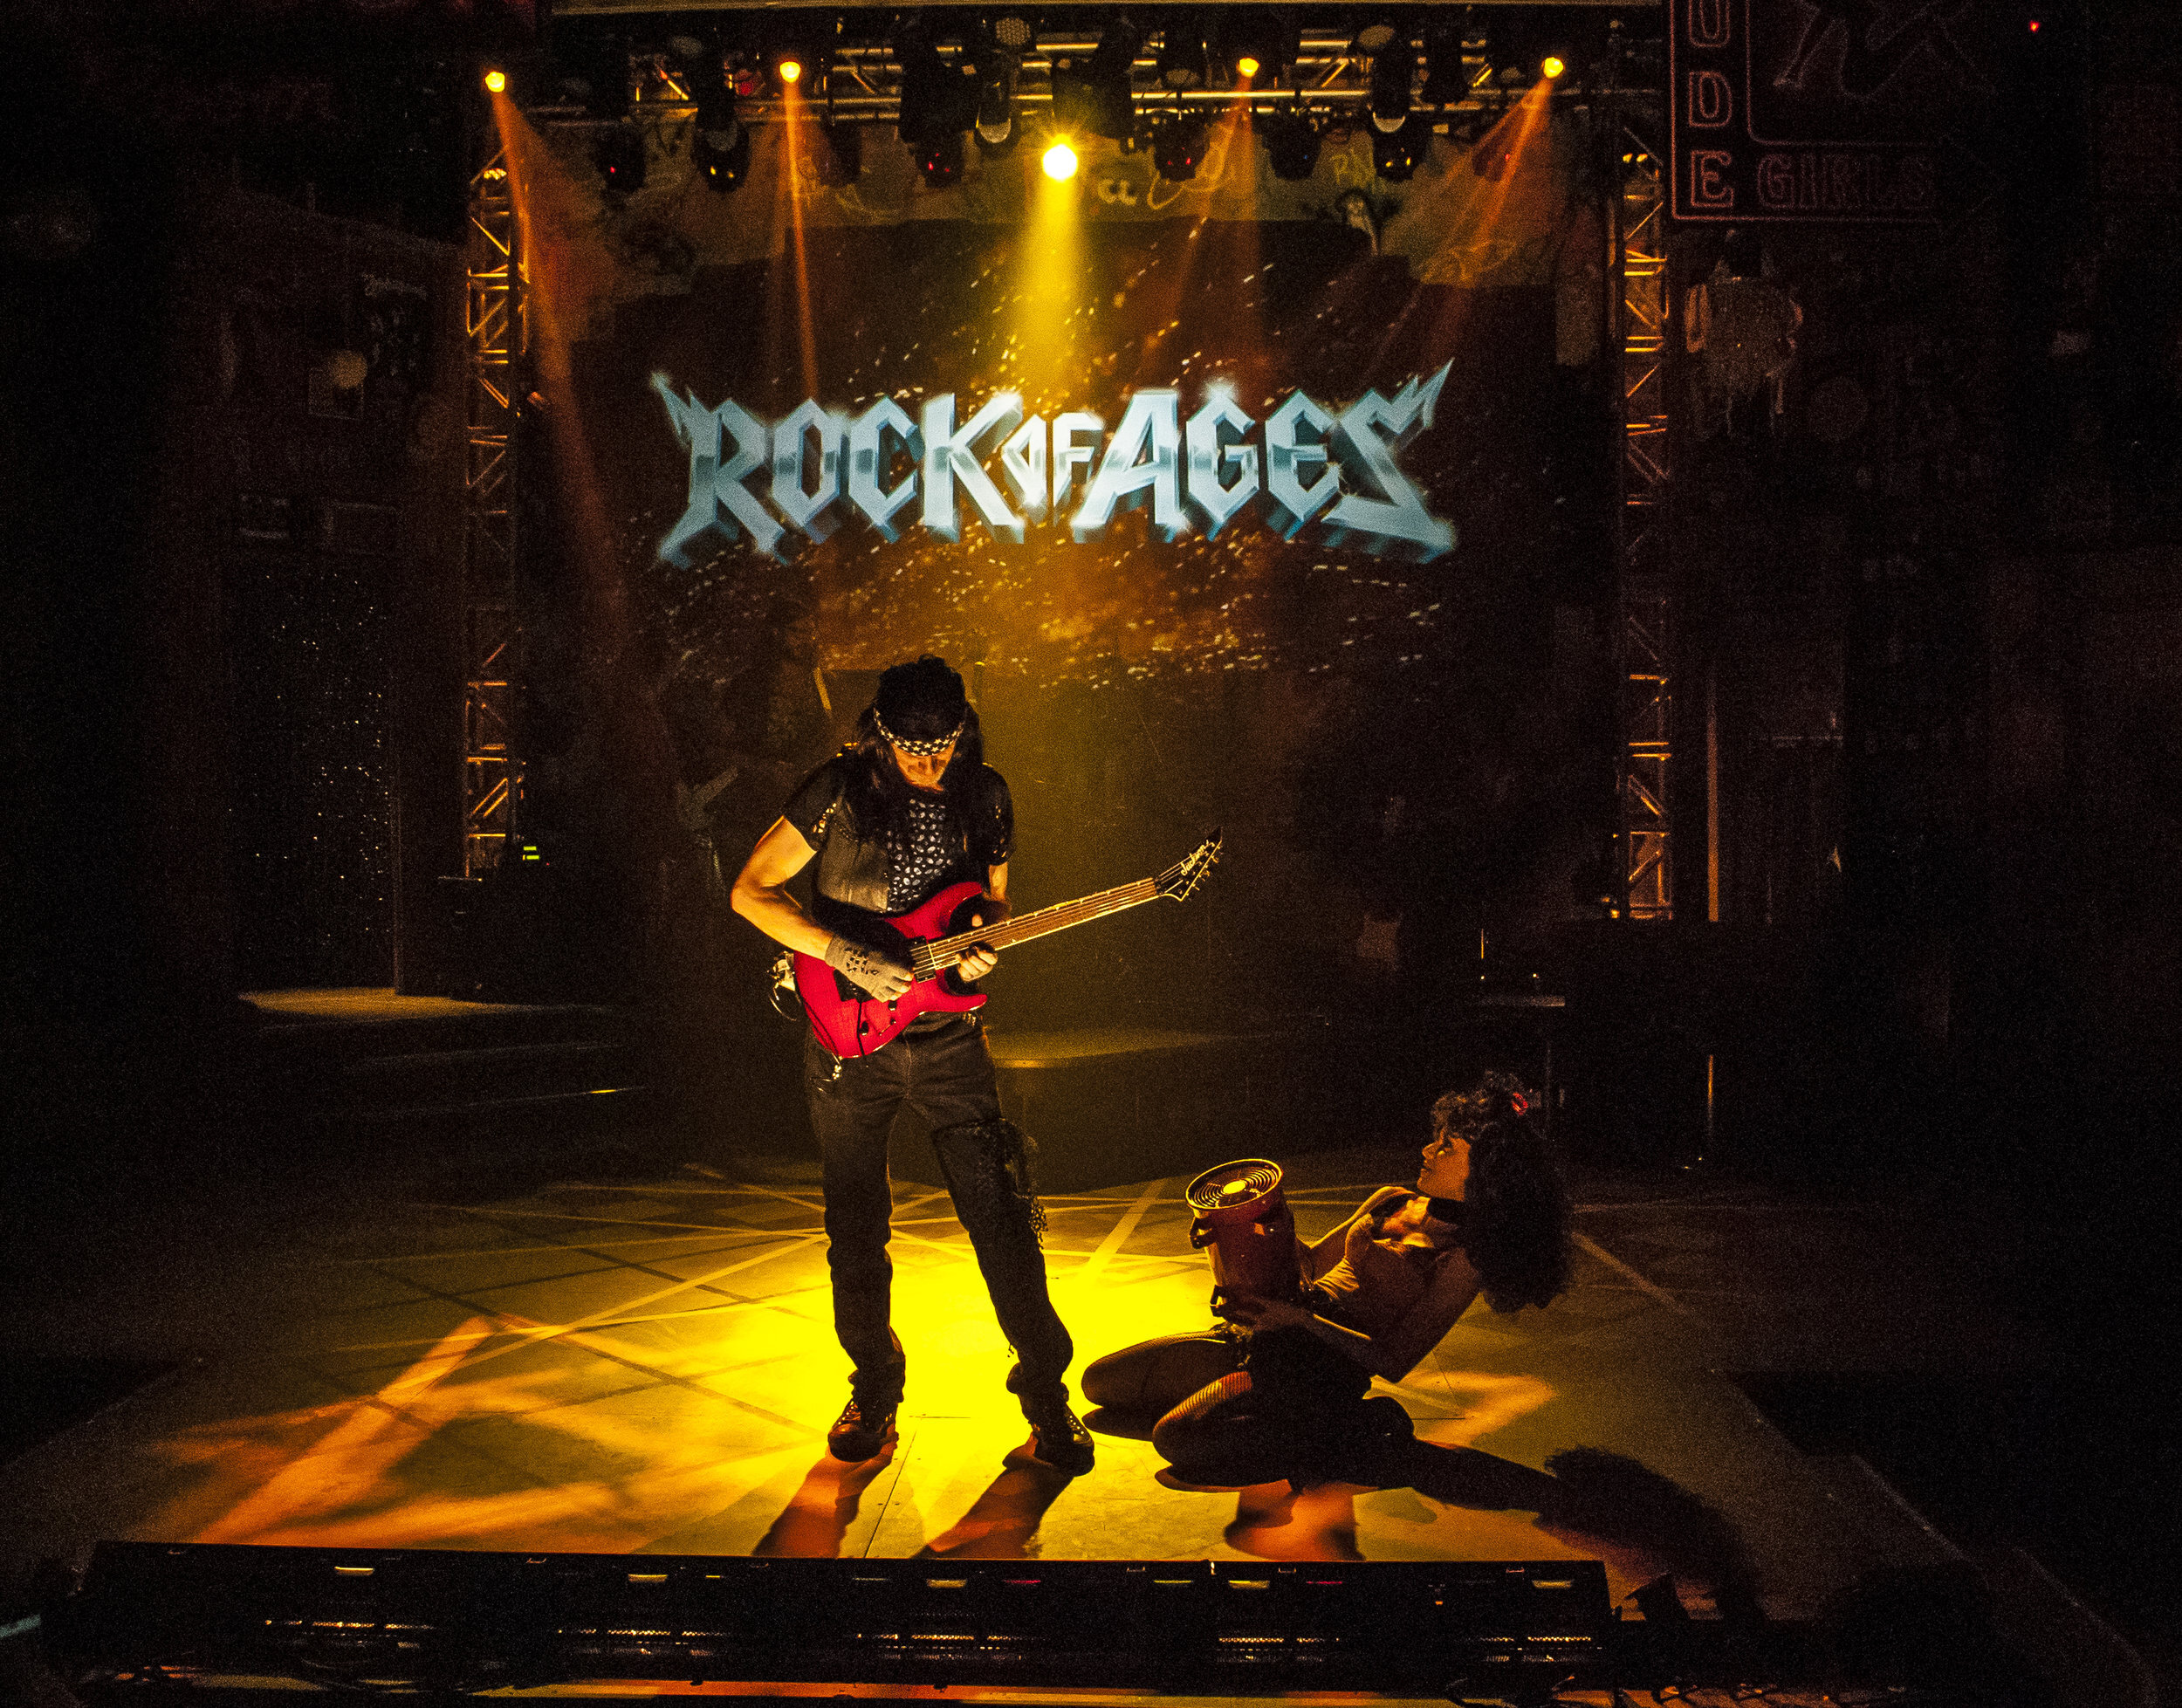 ROCK OF AGES - CYGNET THEATRE